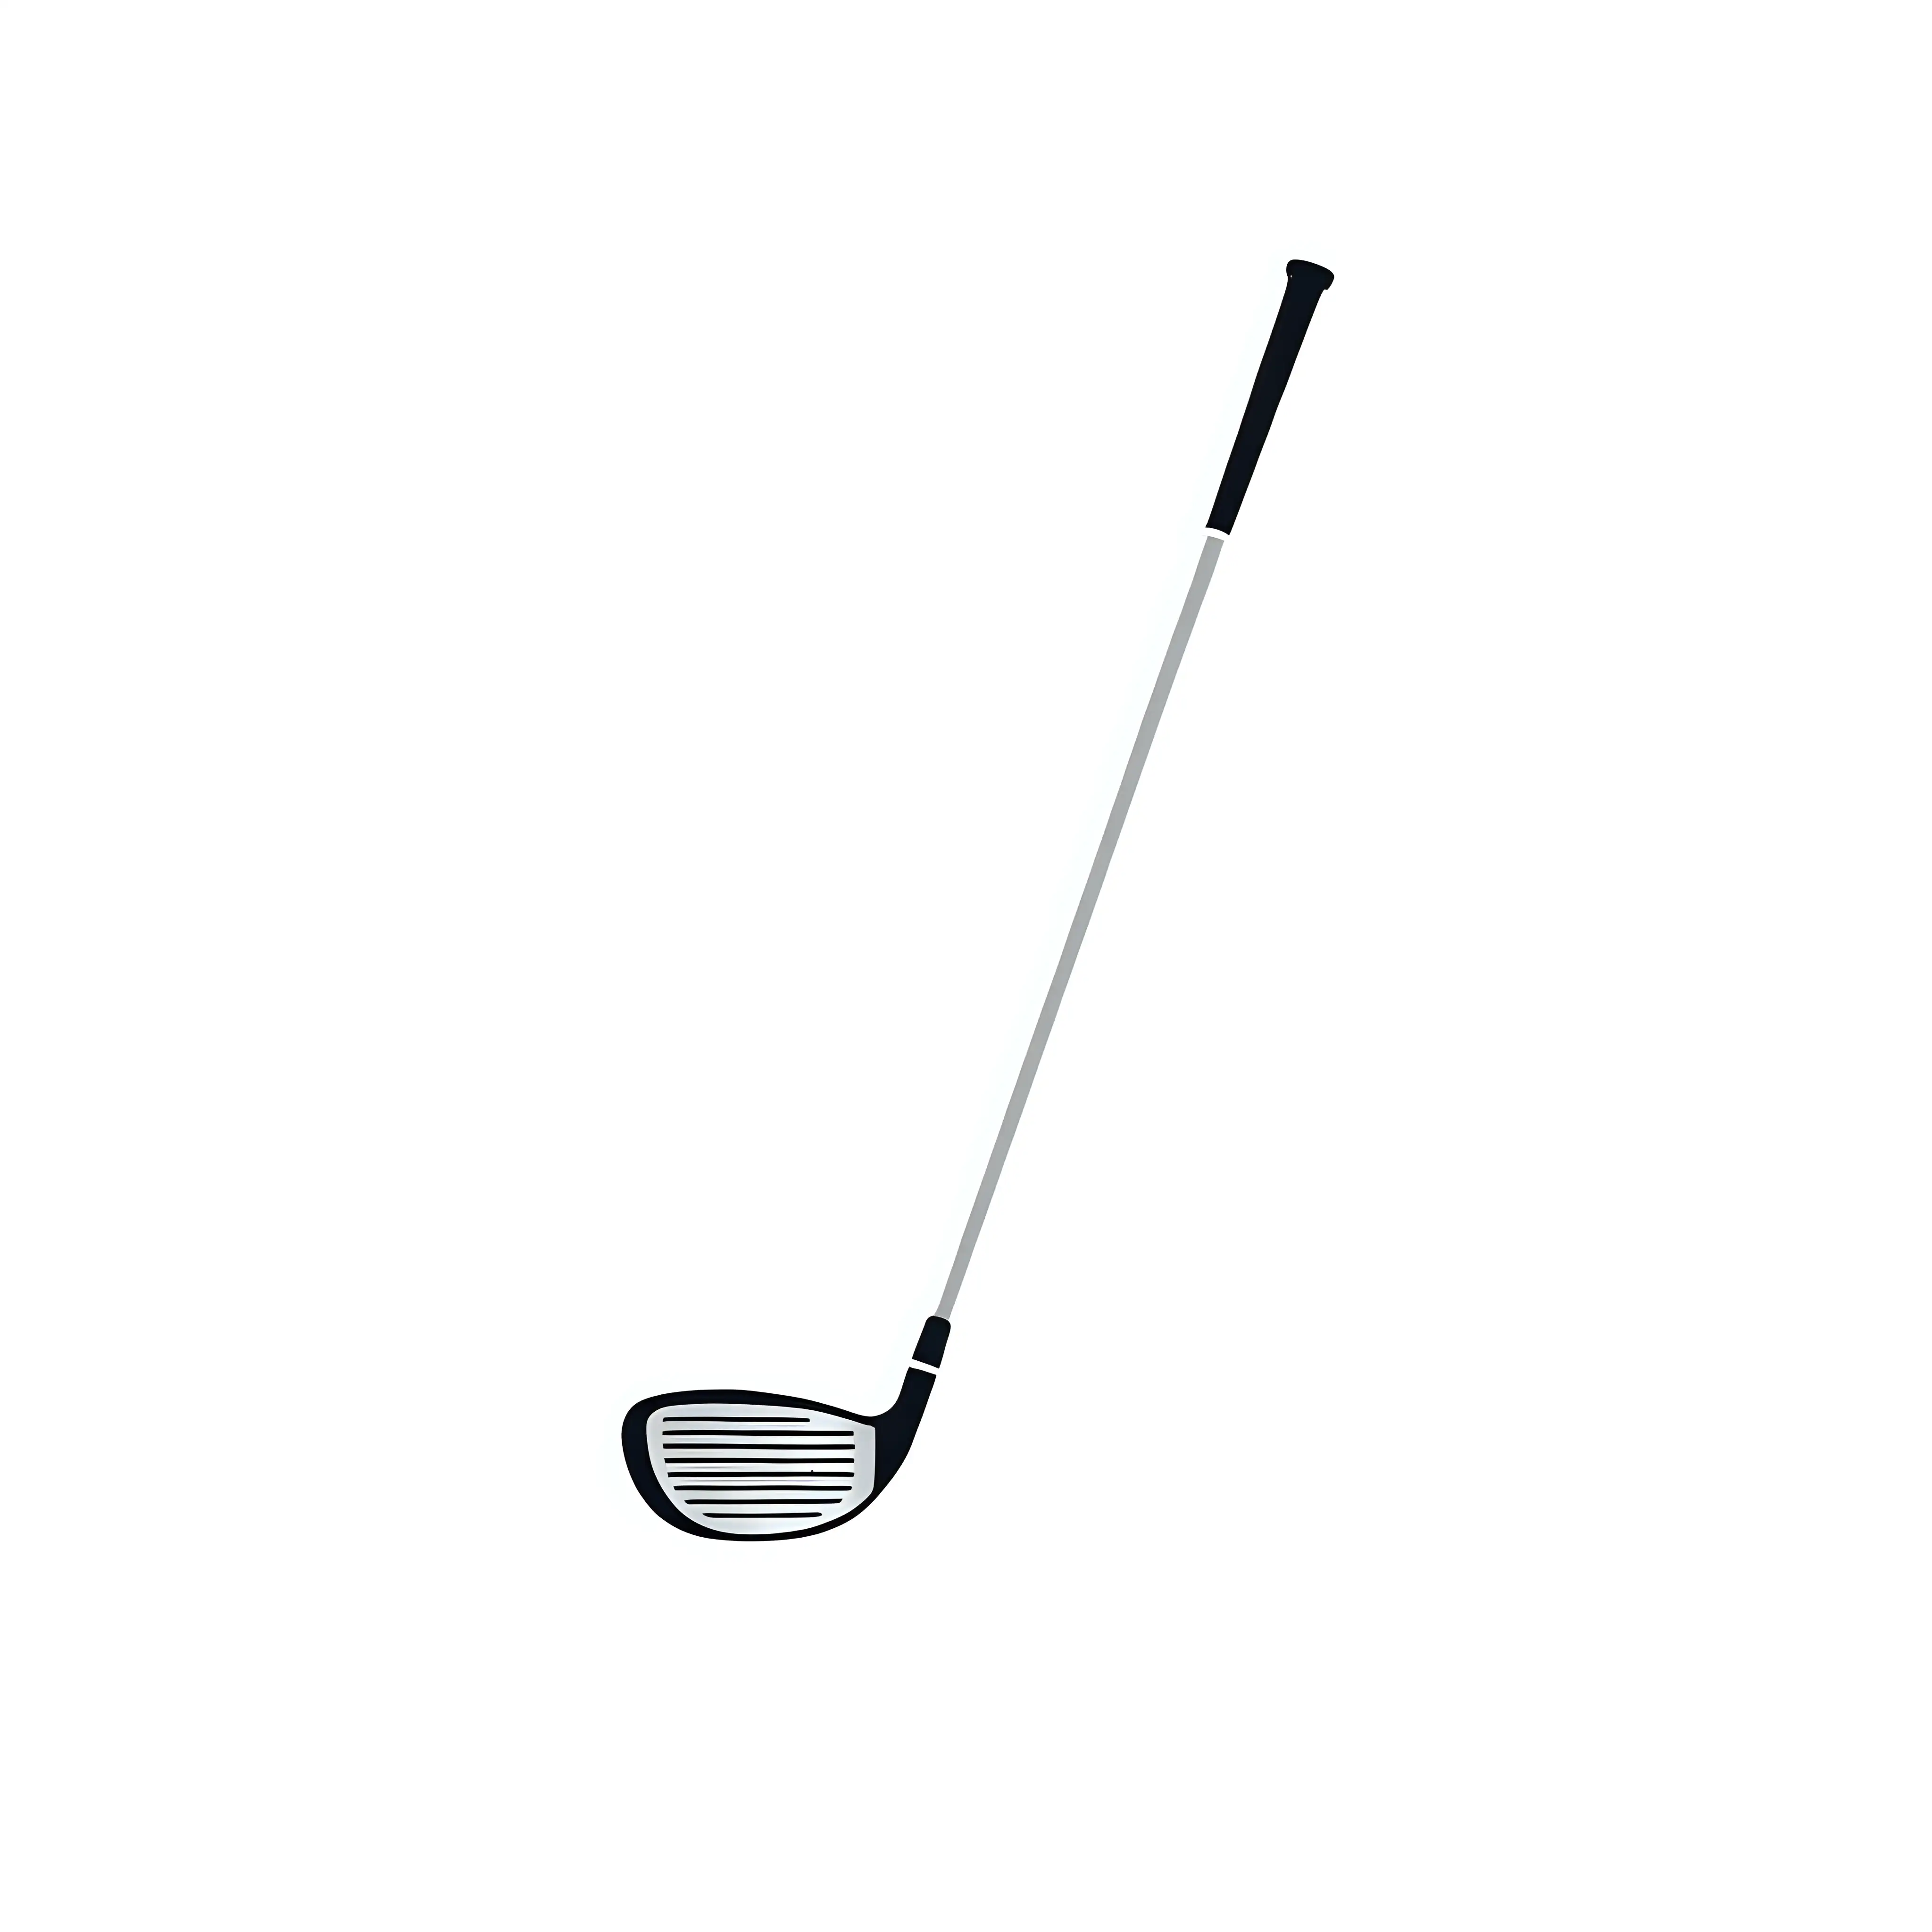 Black silhouette of golf club driver icon on white background, simple flat design vector illustration with no shadow or other elements, no text and letters in the picture, solid black color fill, simple shapes, bold outline, graphic style, minimalist design